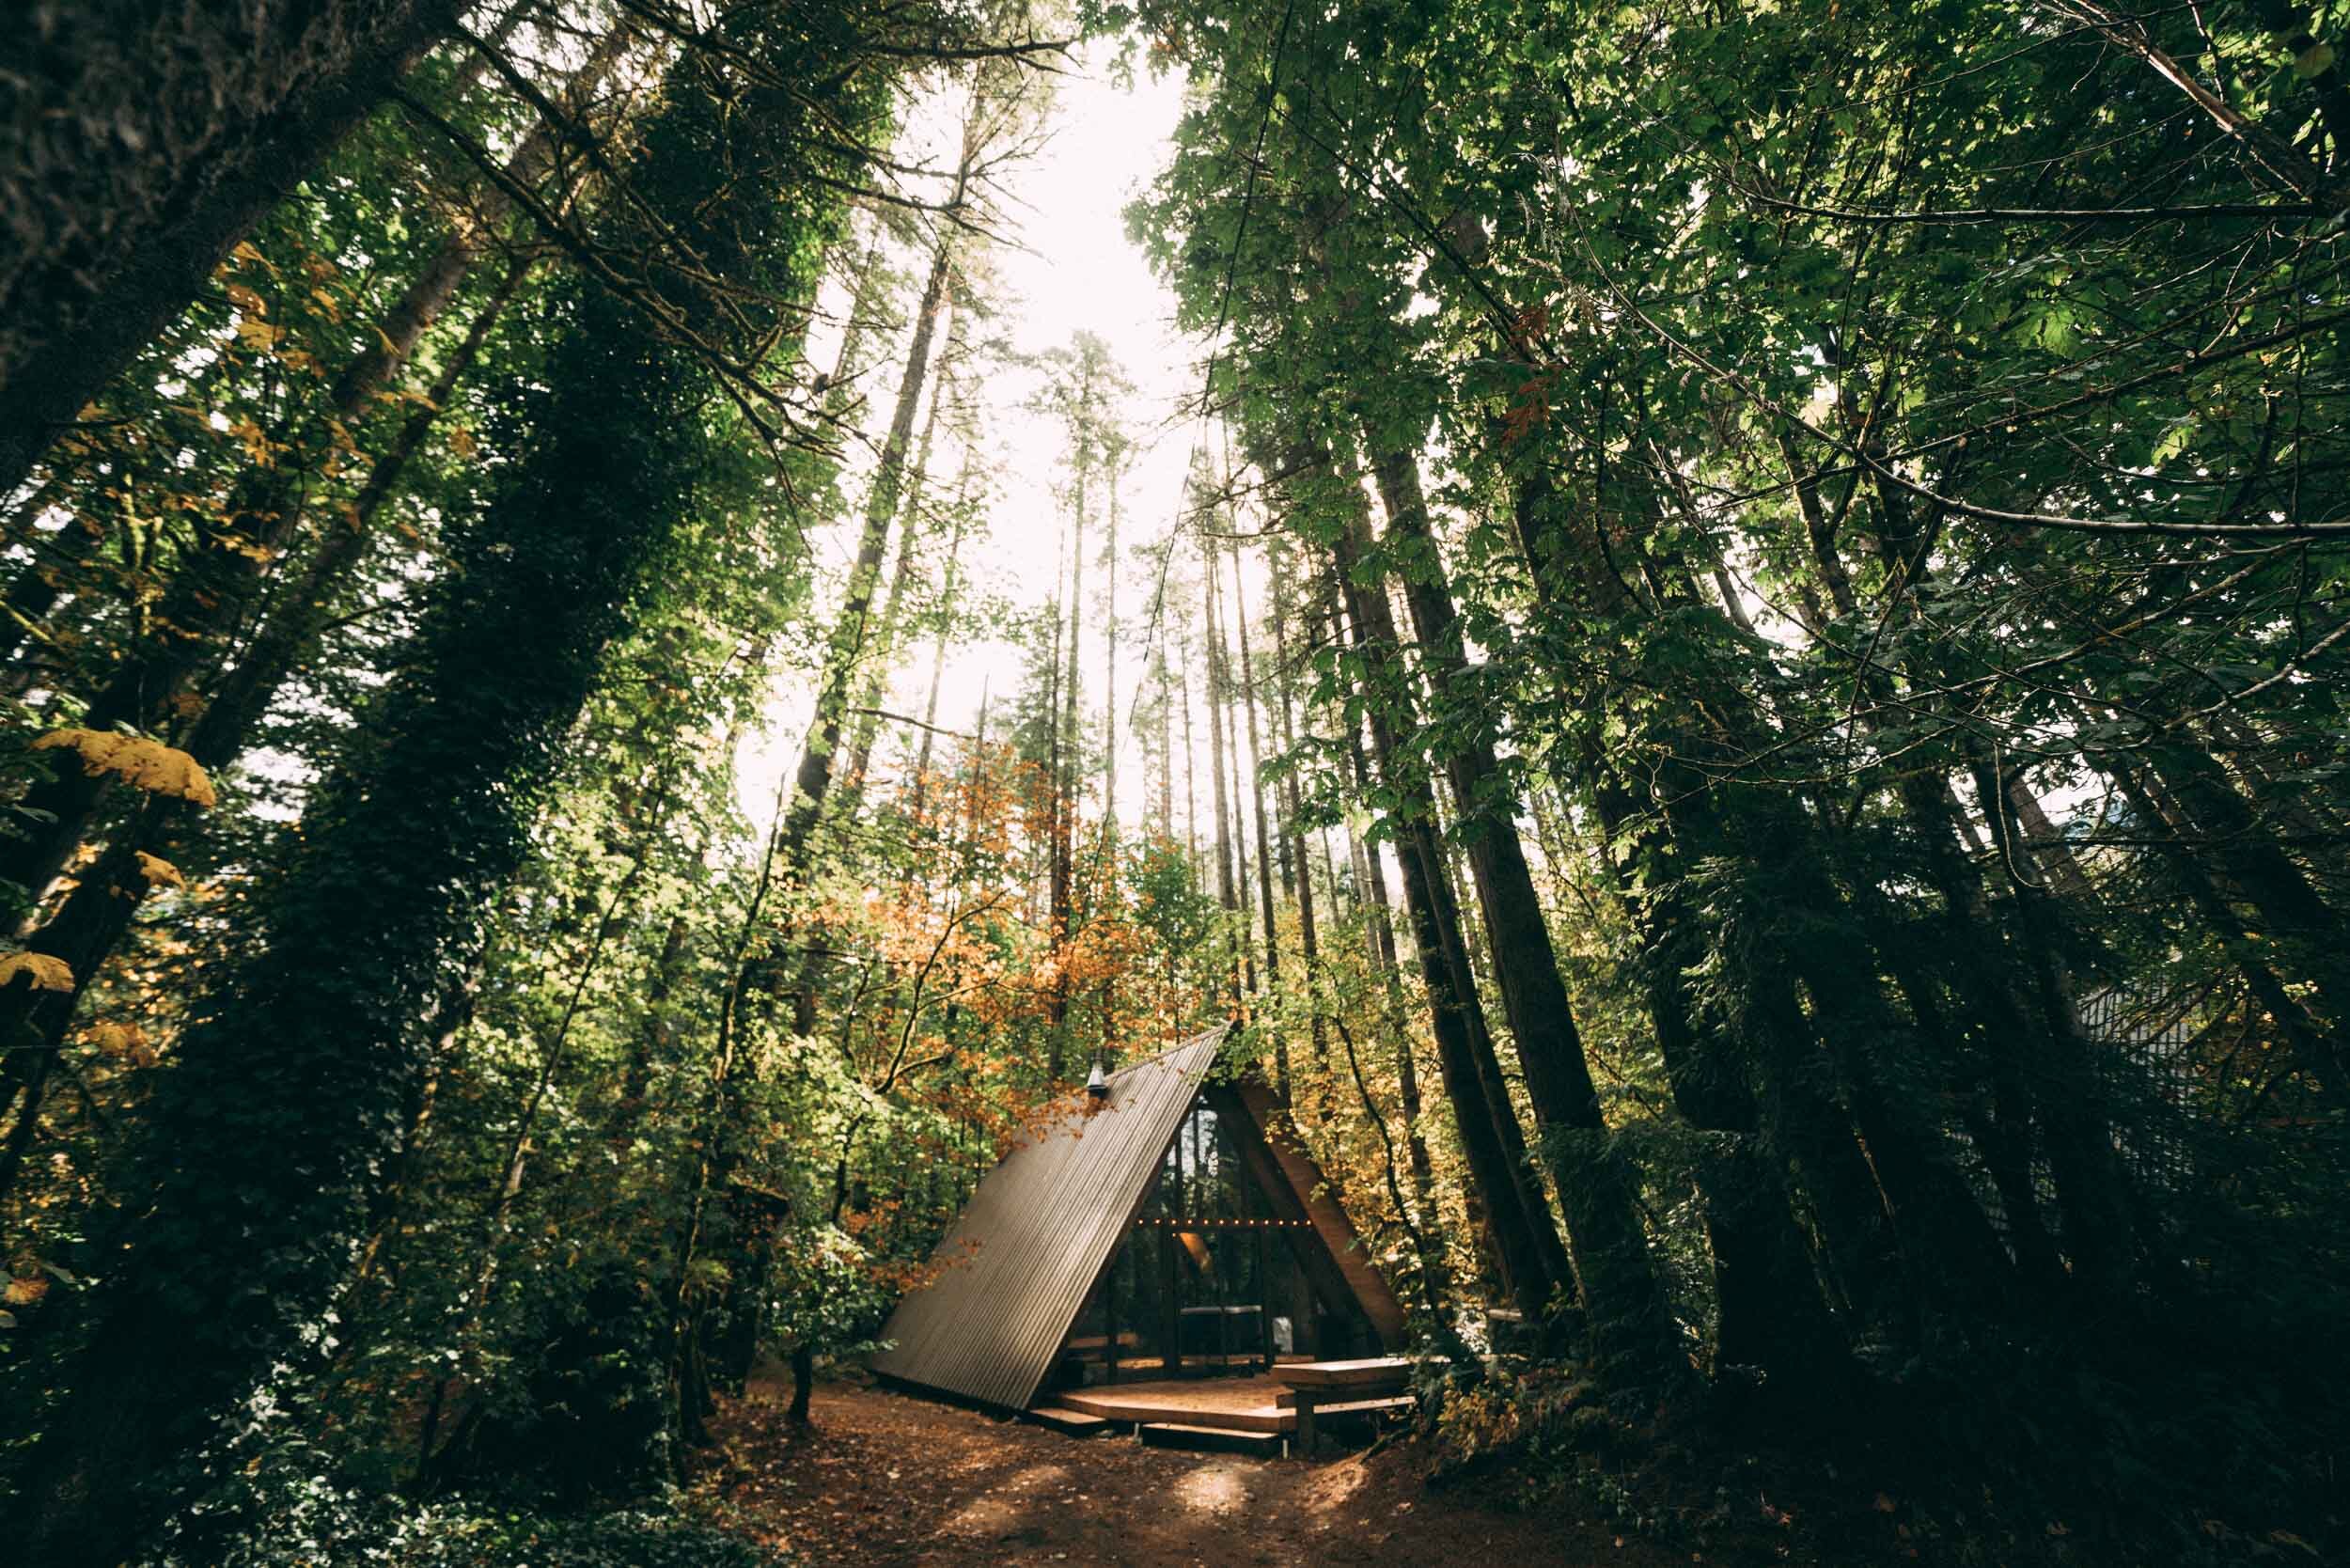 Sky Hous is one of three picturesque A-frame cabins owned by the Tye River Cabin Co. just outside of Skykomish, WA.